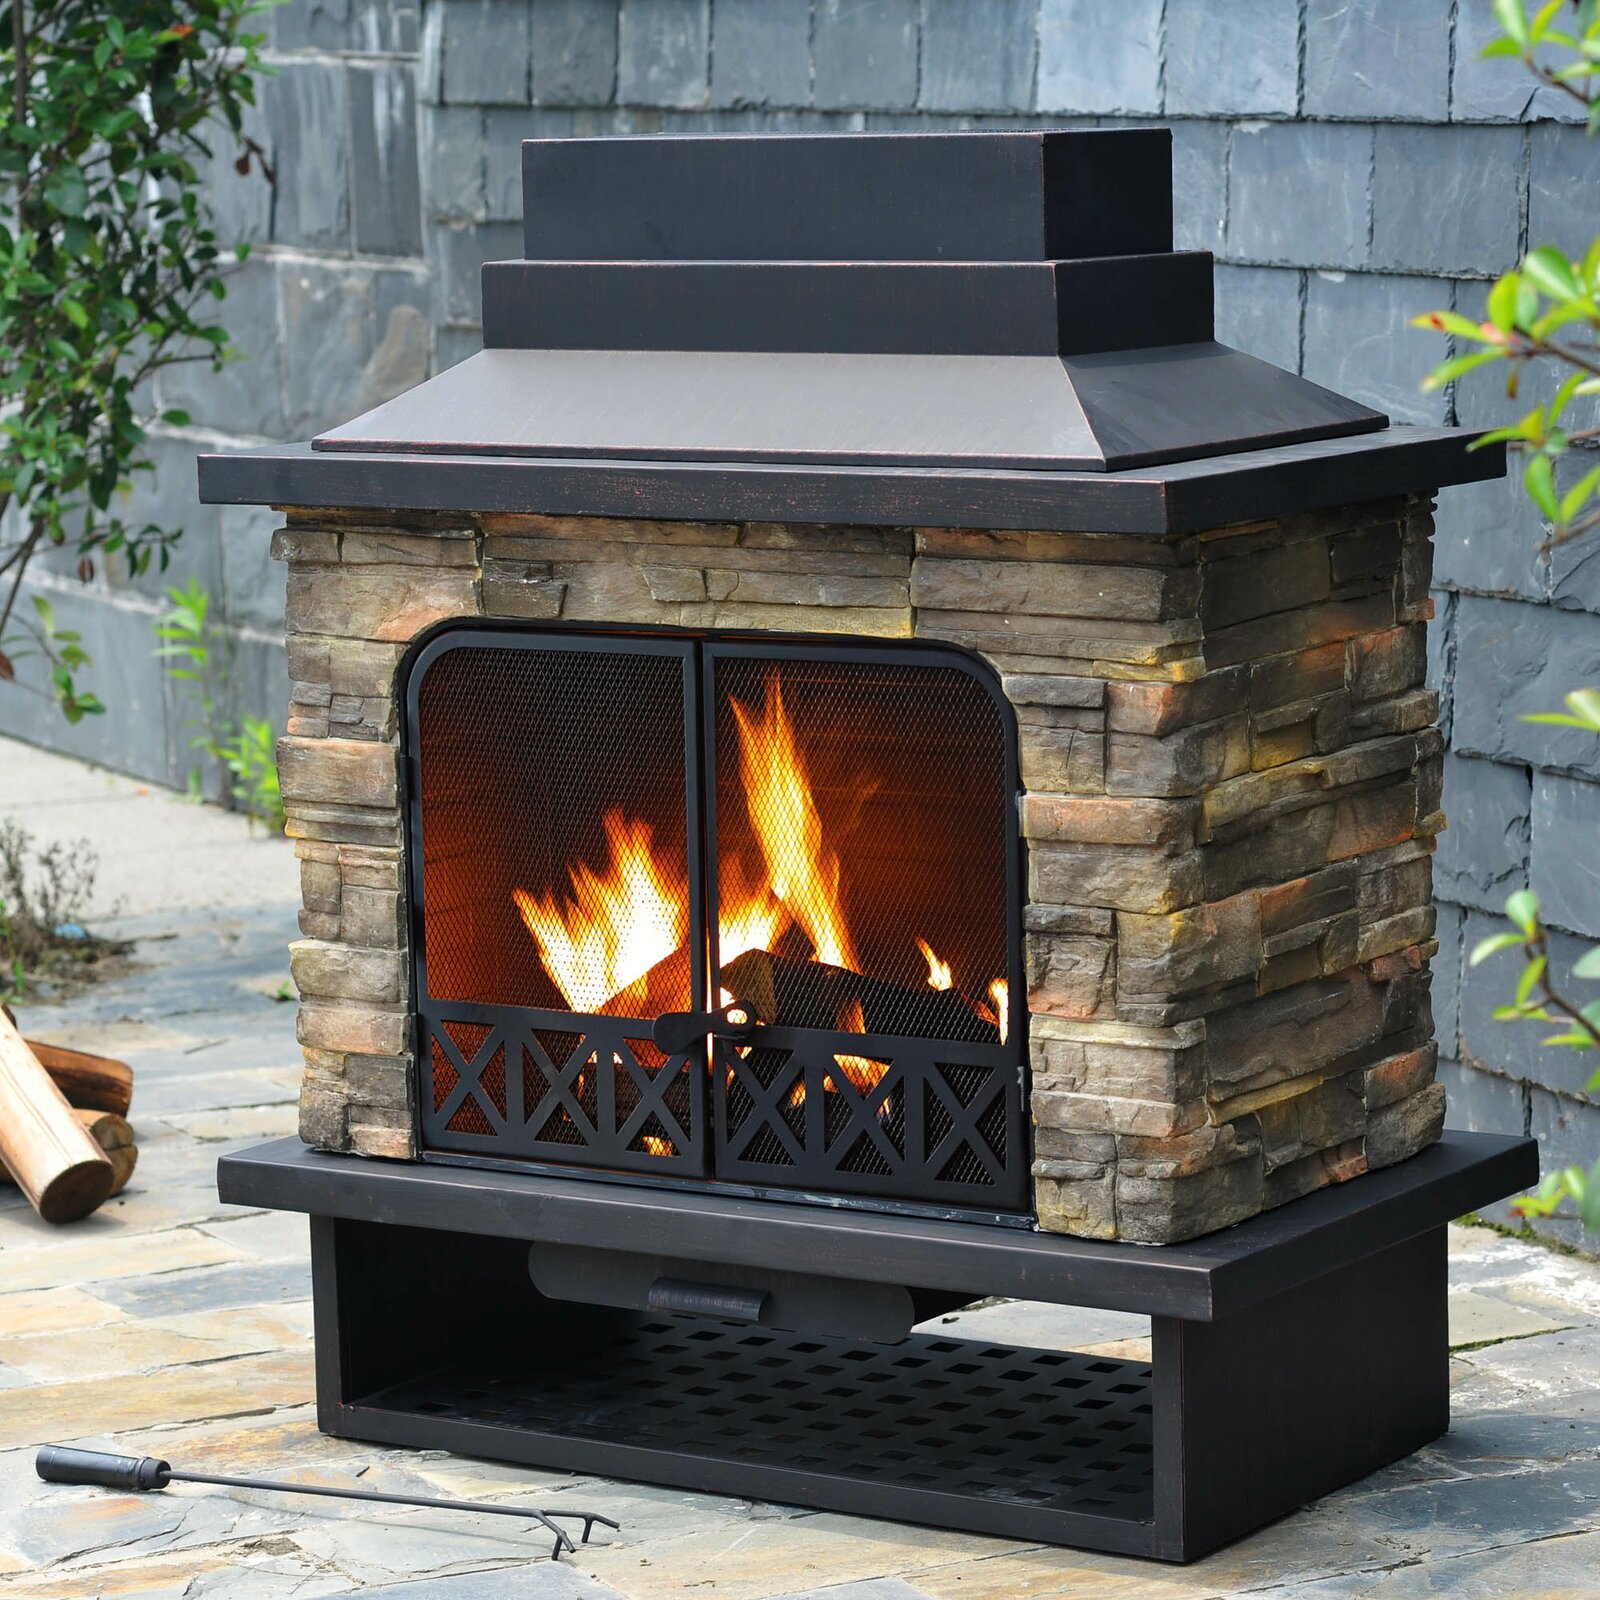 Darby Home Co Outdoor Stone and Metal Fireplace with Chimney